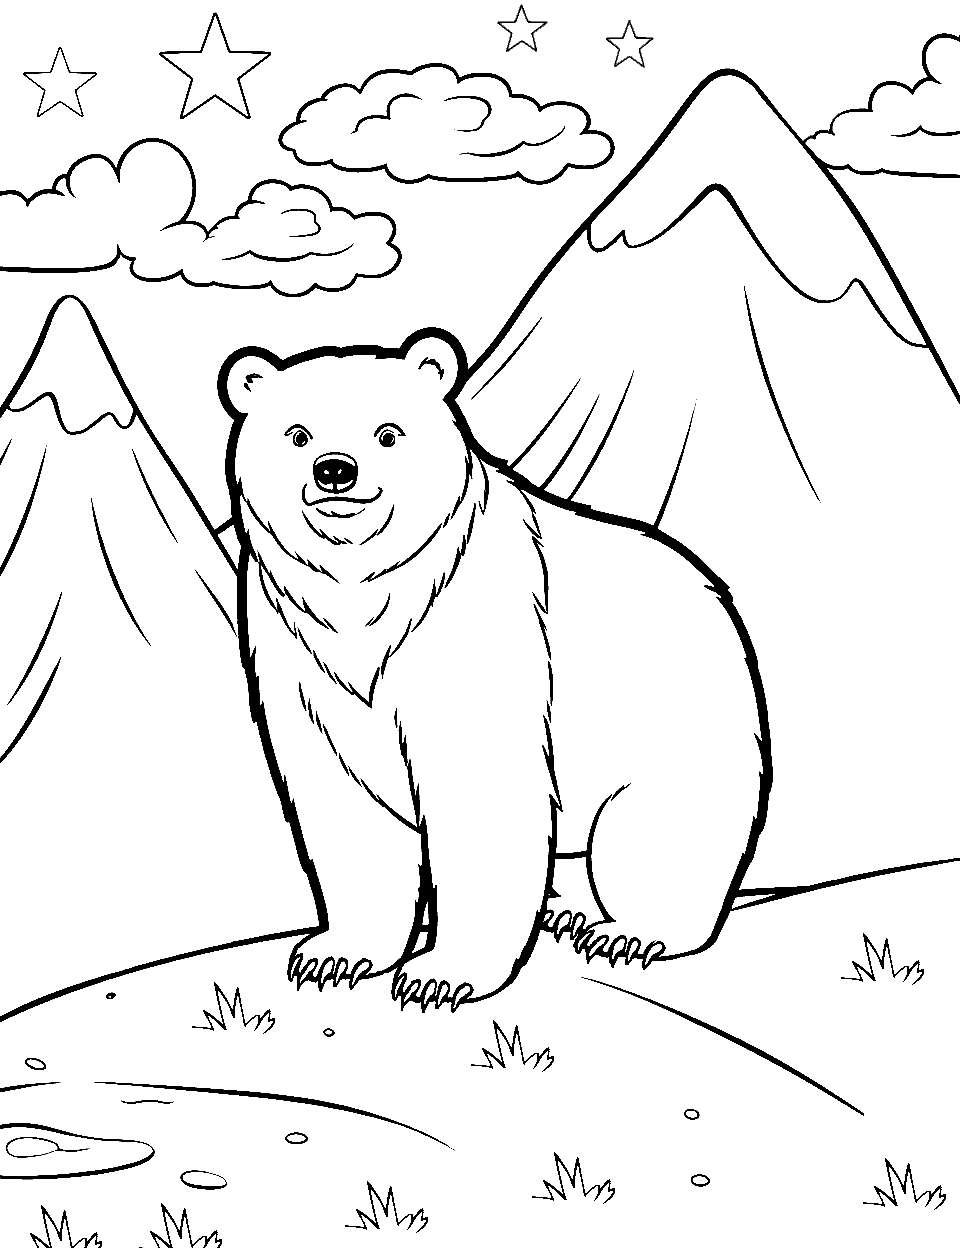 Camping Bear Adventure Coloring Page - A bear out to camp under a starry night sky.